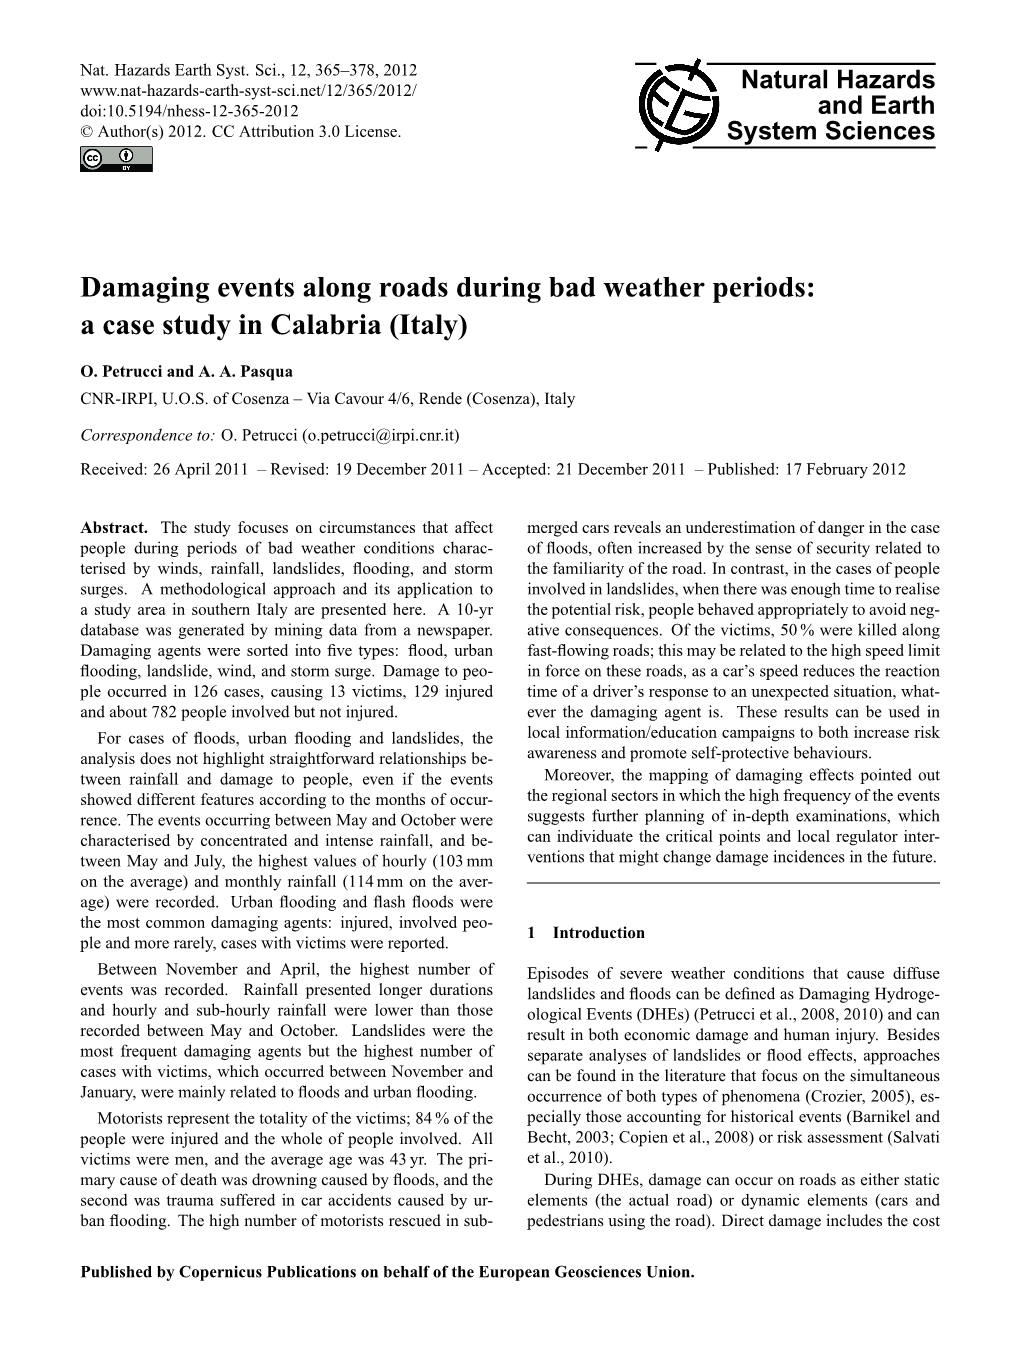 Damaging Events Along Roads During Bad Weather Periods: a Case Study in Calabria (Italy)